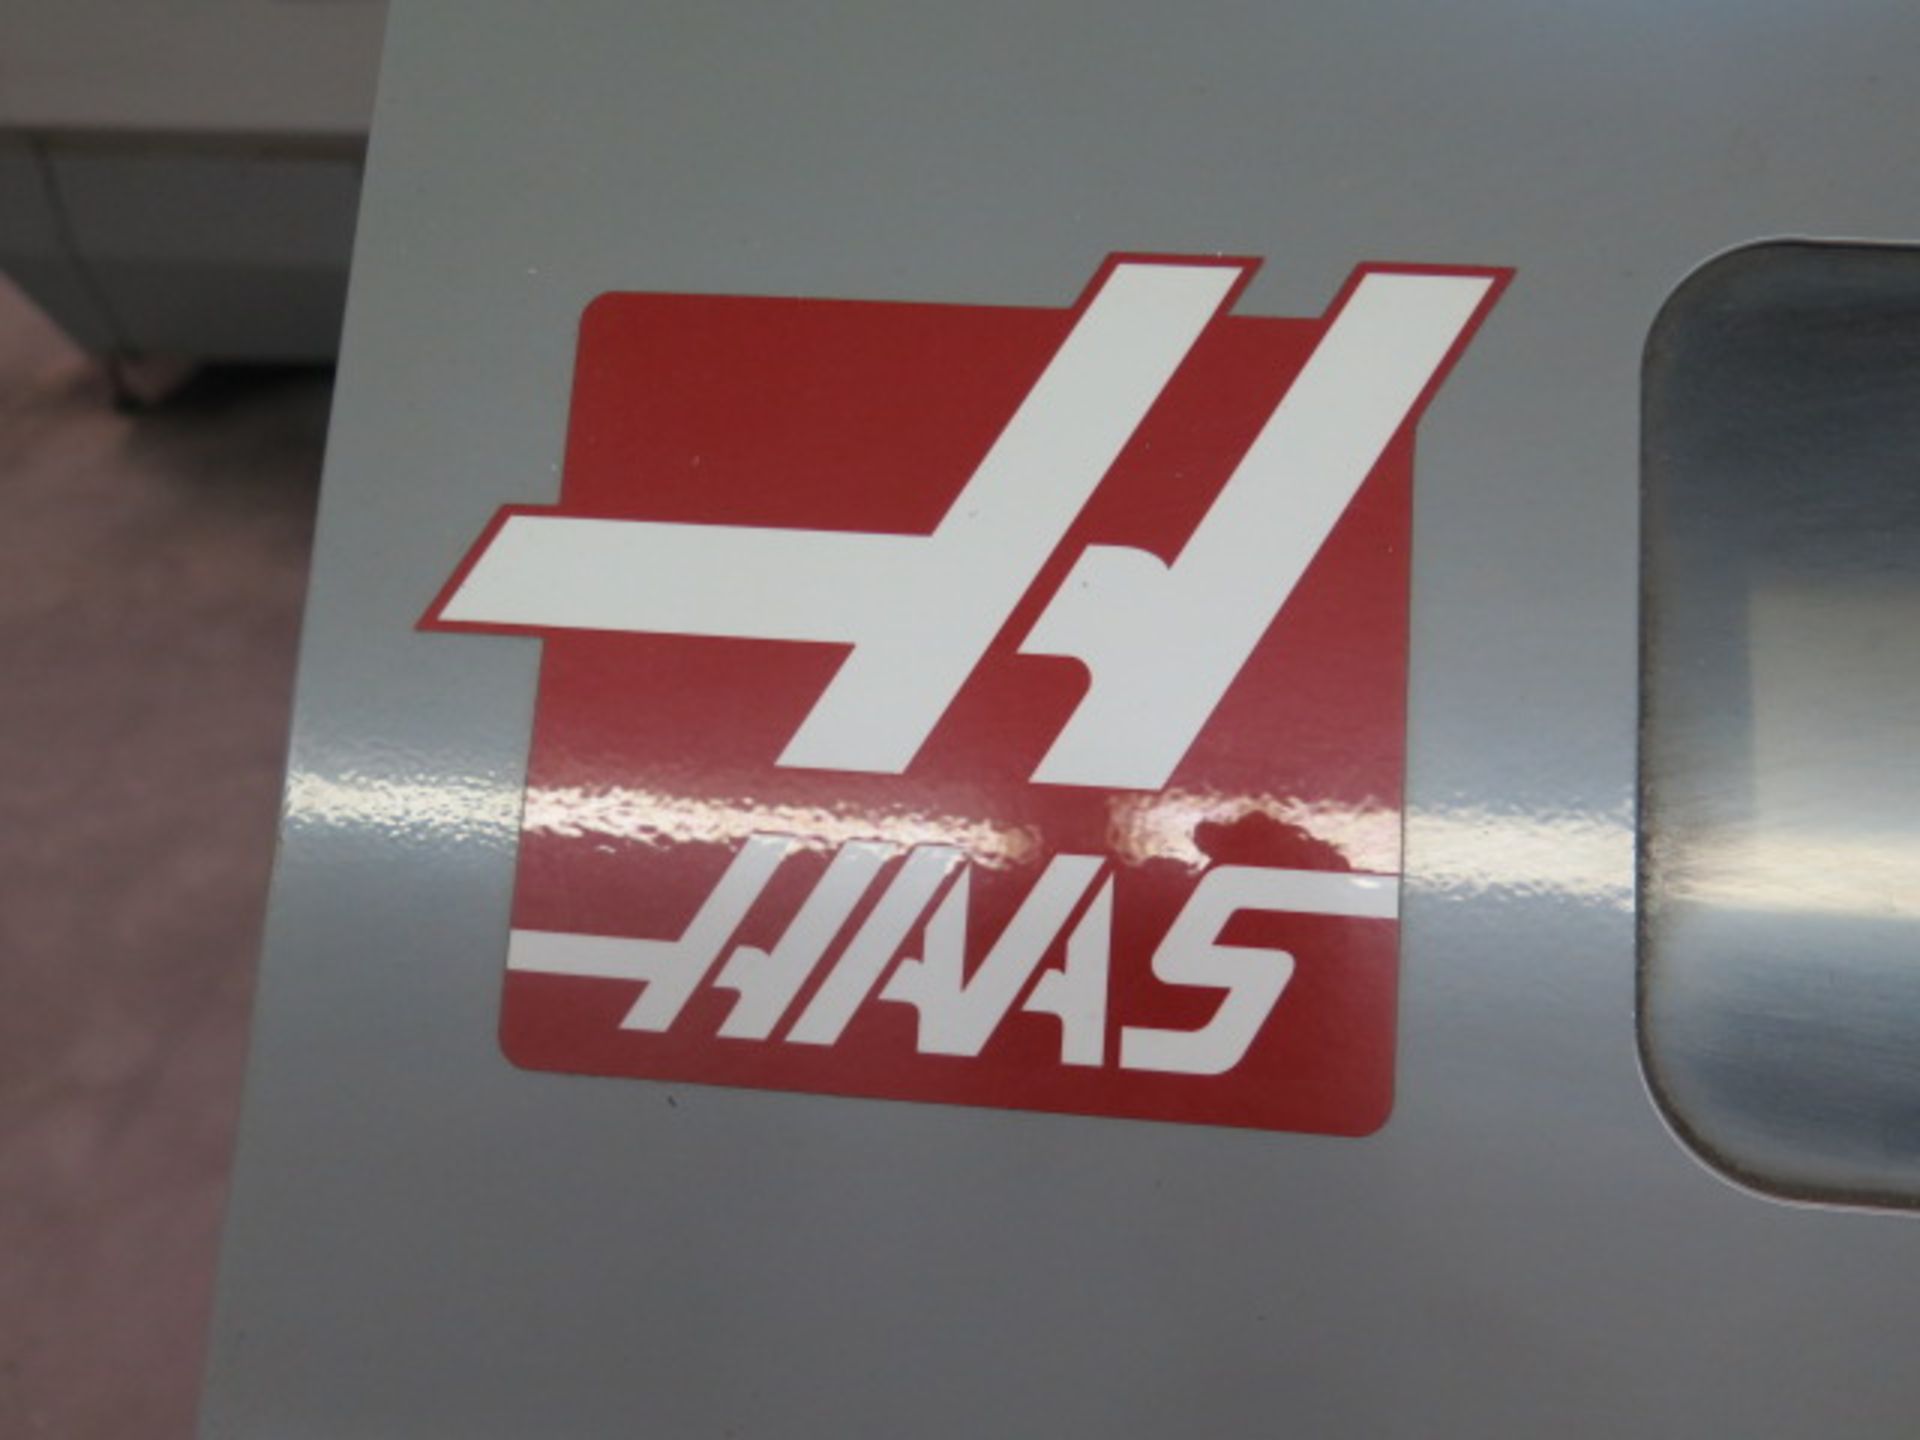 Haas Servobar 300 Automatic Bar Loader / Feeder s/n 92046 w/ Spindle Liner Set (SOLD AS-IS - NO WARR - Image 4 of 11